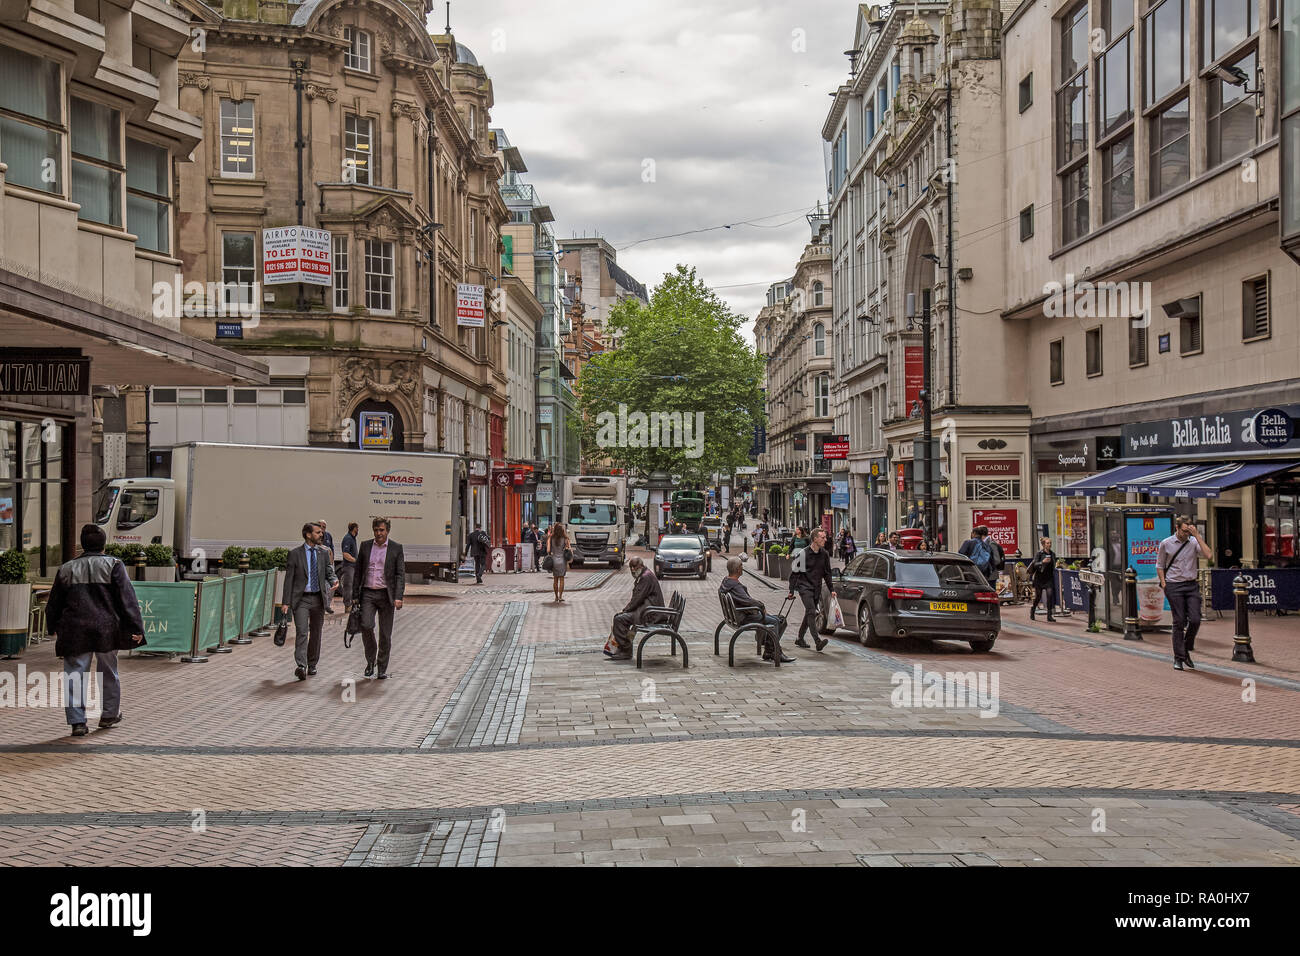 Pedestrianised New Street in the City of Birmingham, England, showing shops and pedestrian walkways. Stock Photo